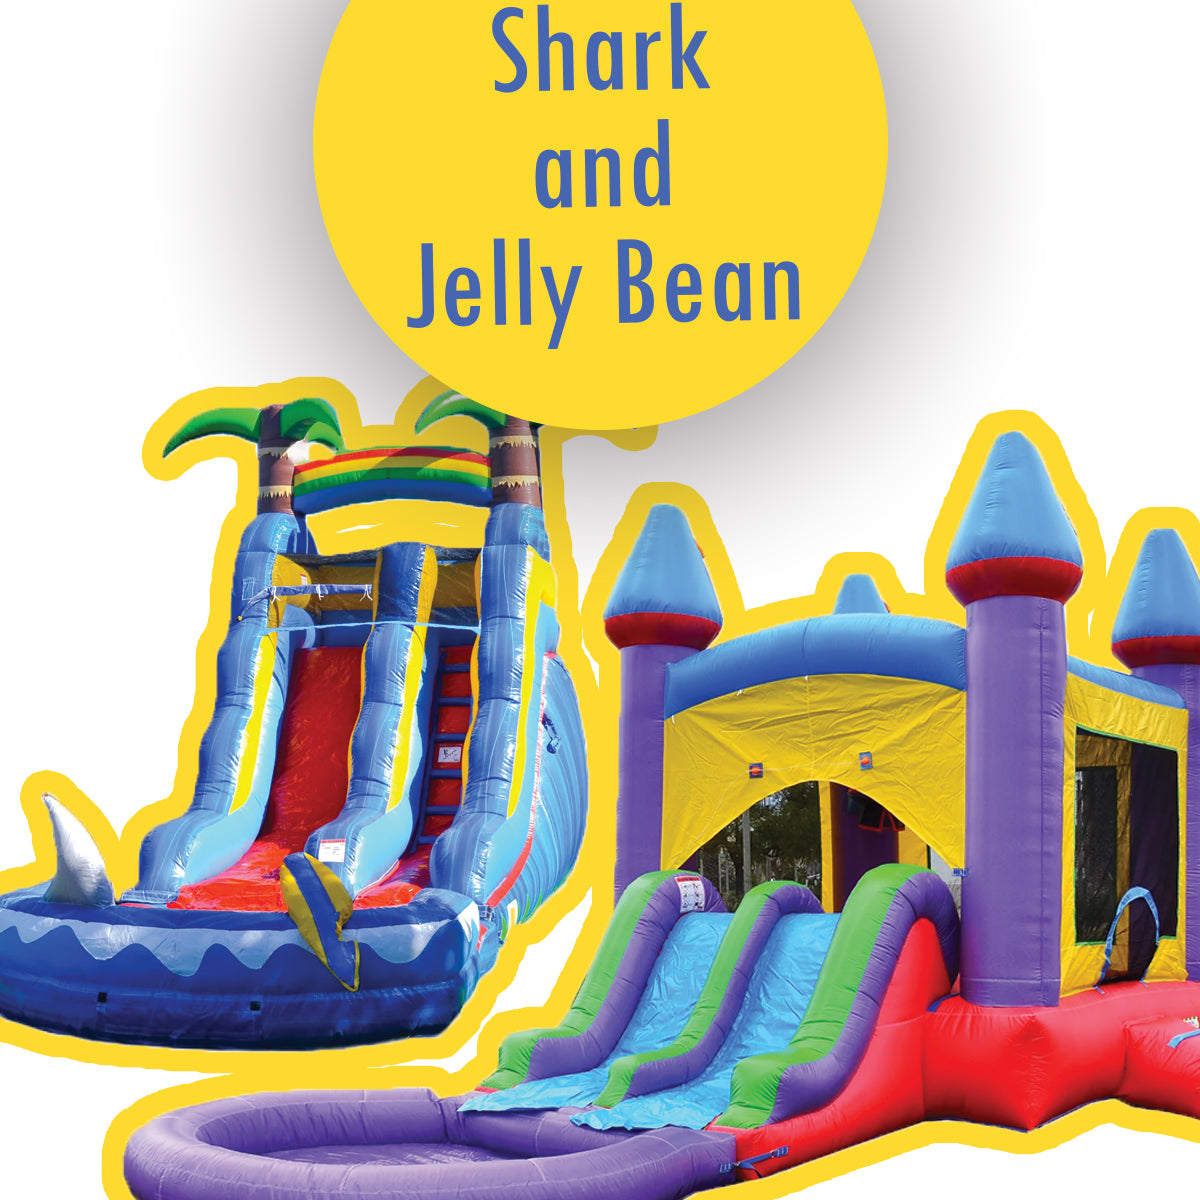 buy direct lightweight bounce house and inflatable water slide bundle shark and jelly bean inflatable castle